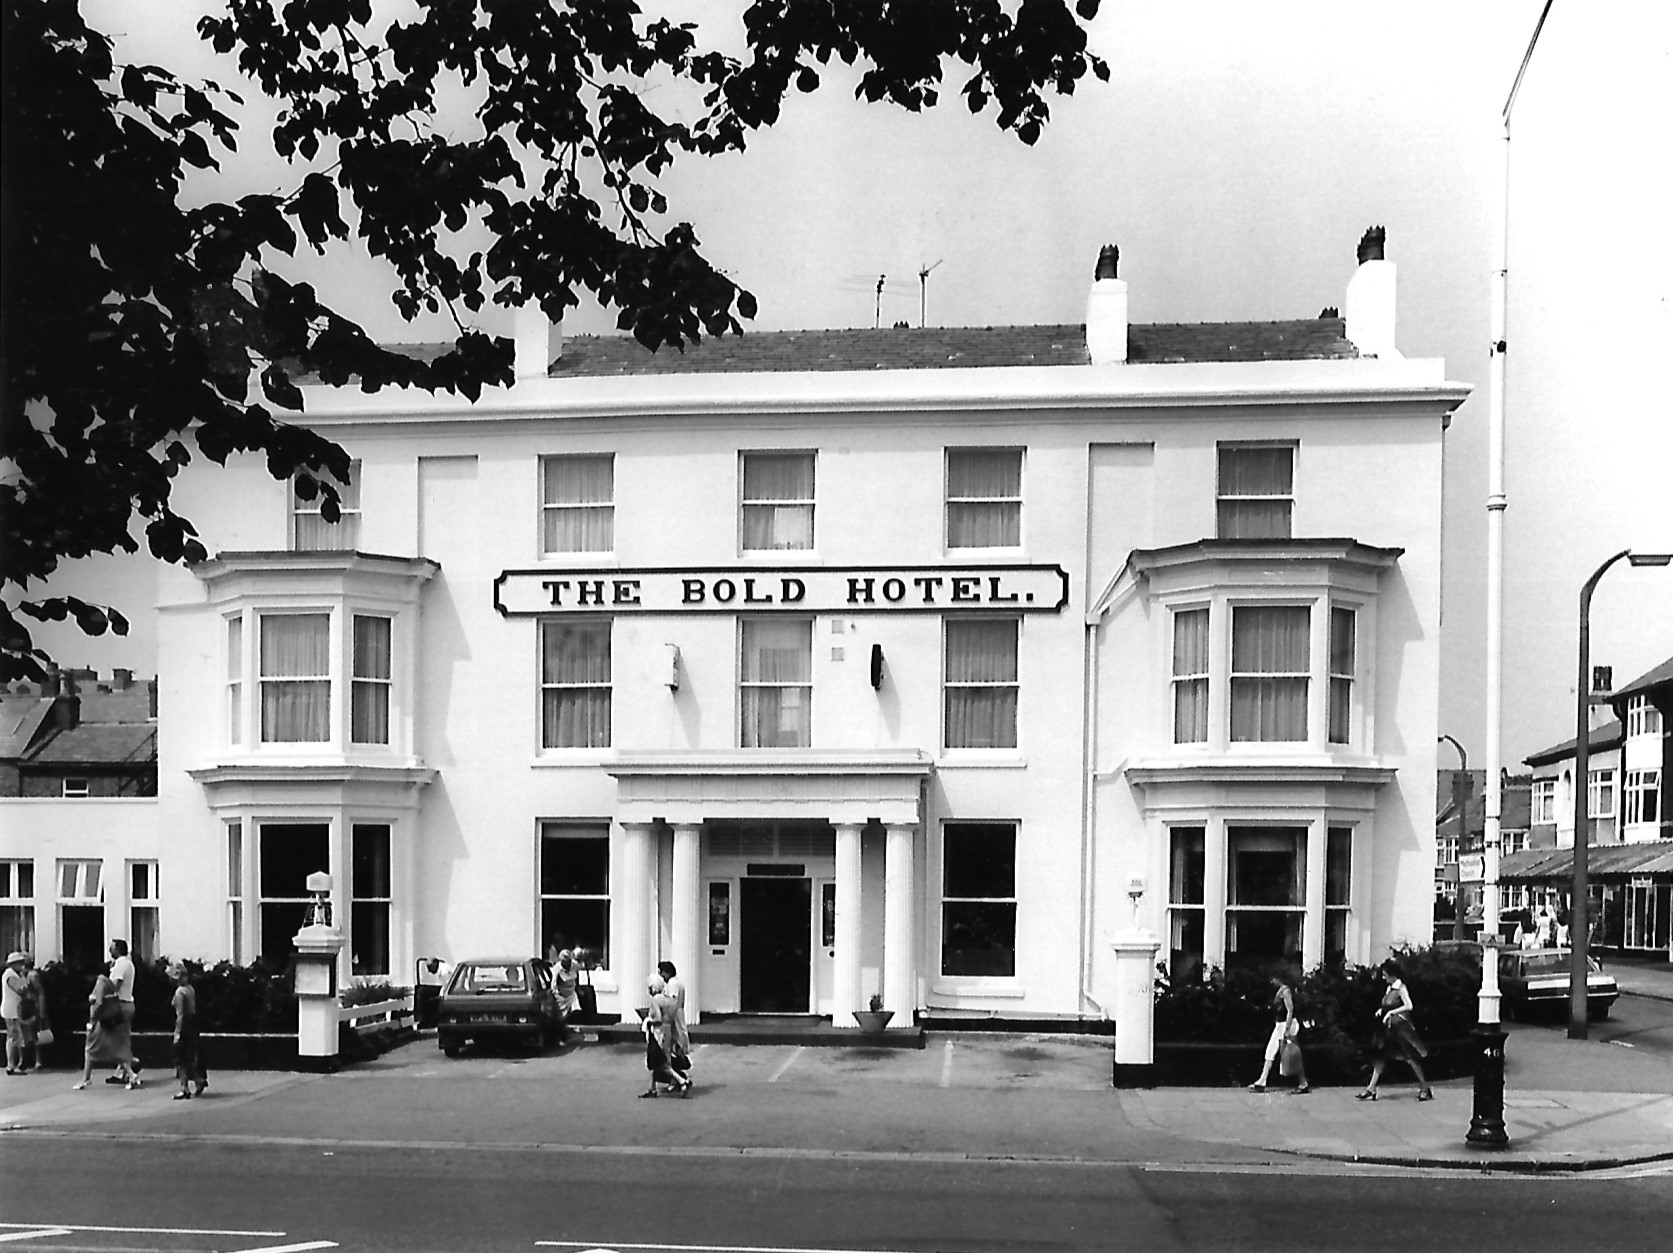 The Bold Hotel on Lord Street in Southport in July 1983